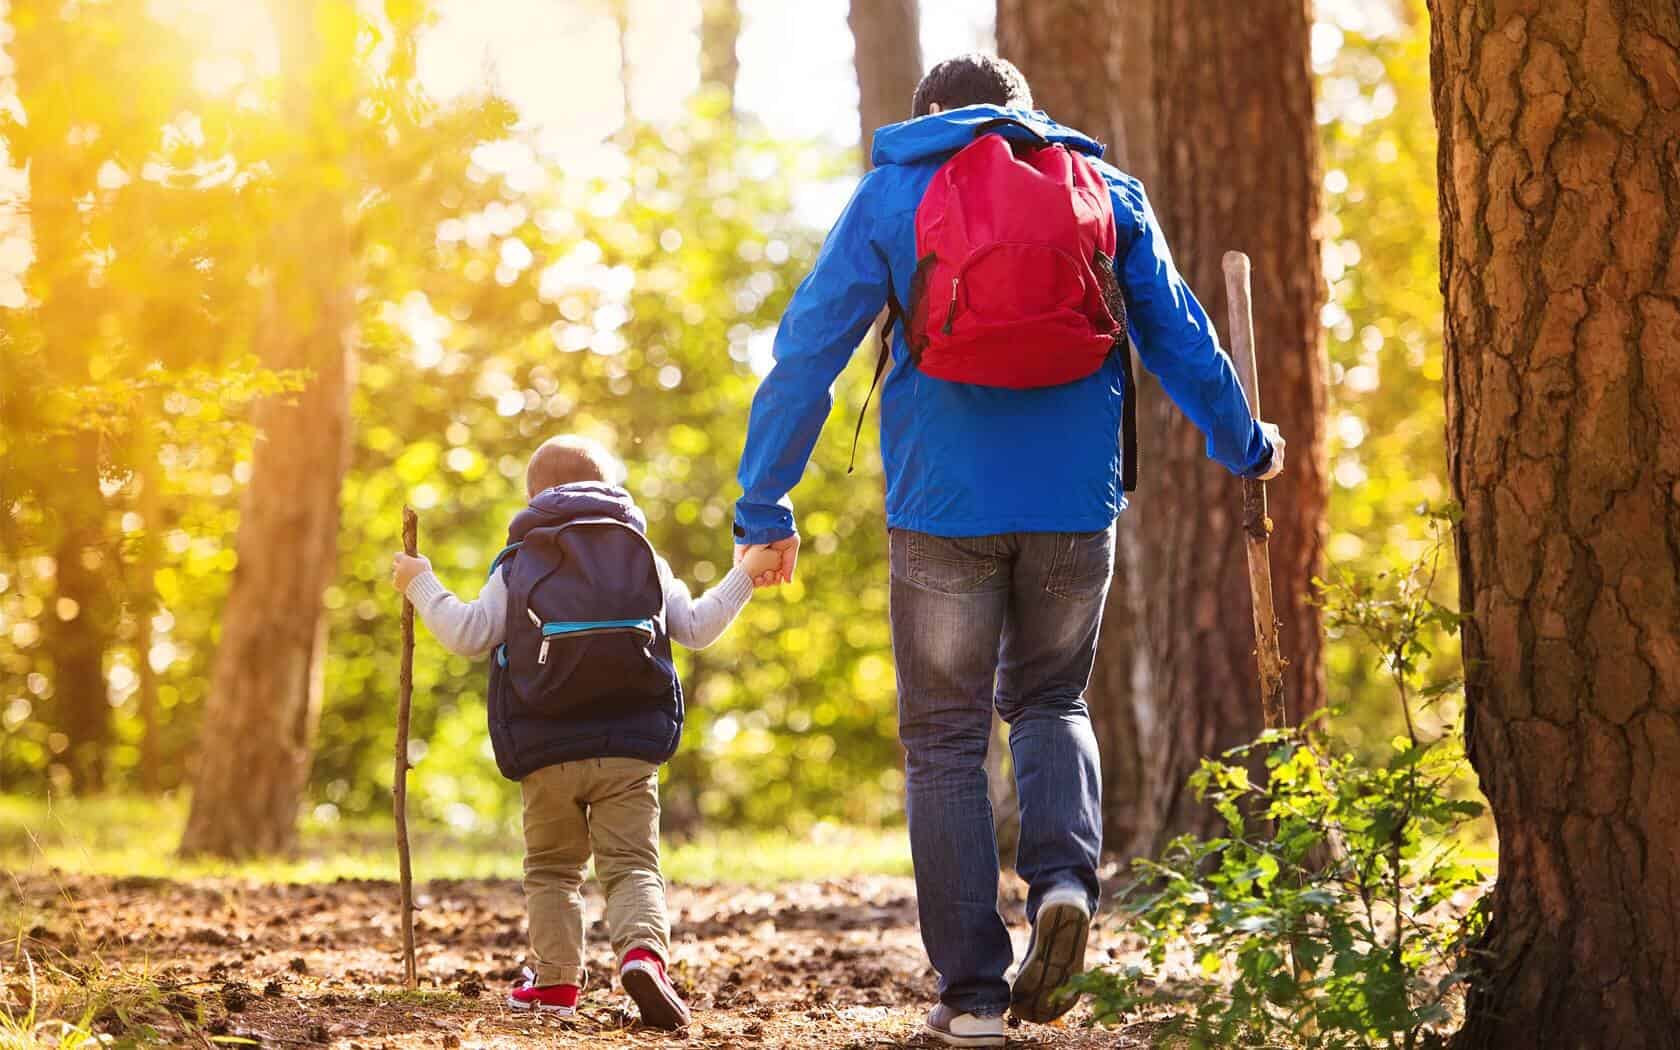 A father and son hiking in the forest.